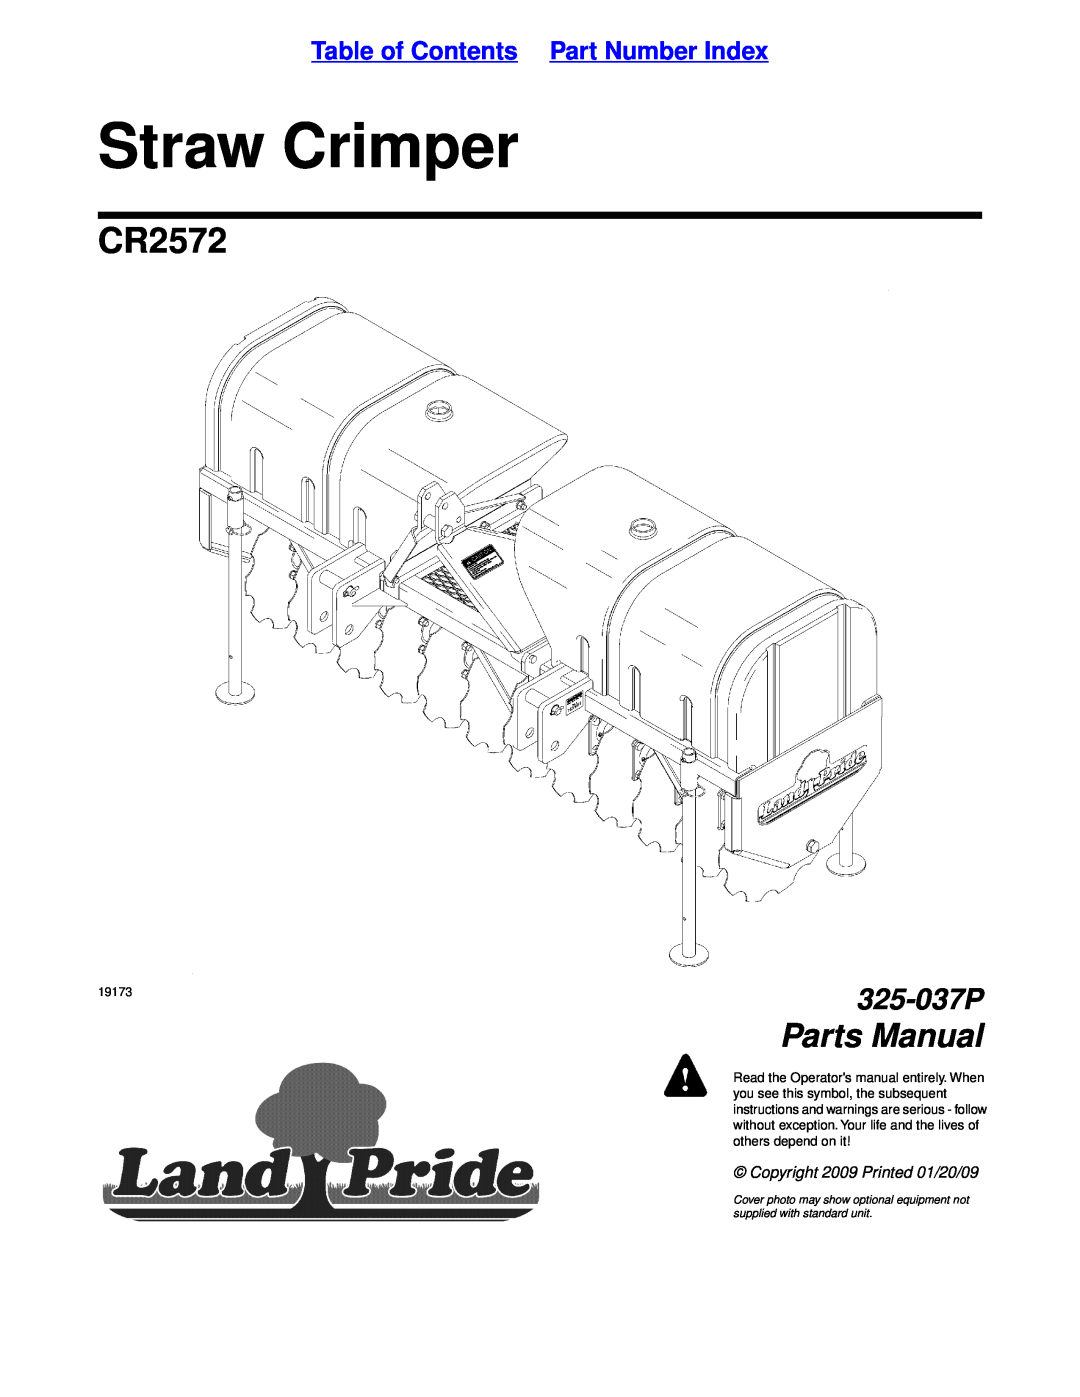 Land Pride CR2572 manual Table of Contents Part Number Index, Straw Crimper, Parts Manual, 325-037P, others depend on it 